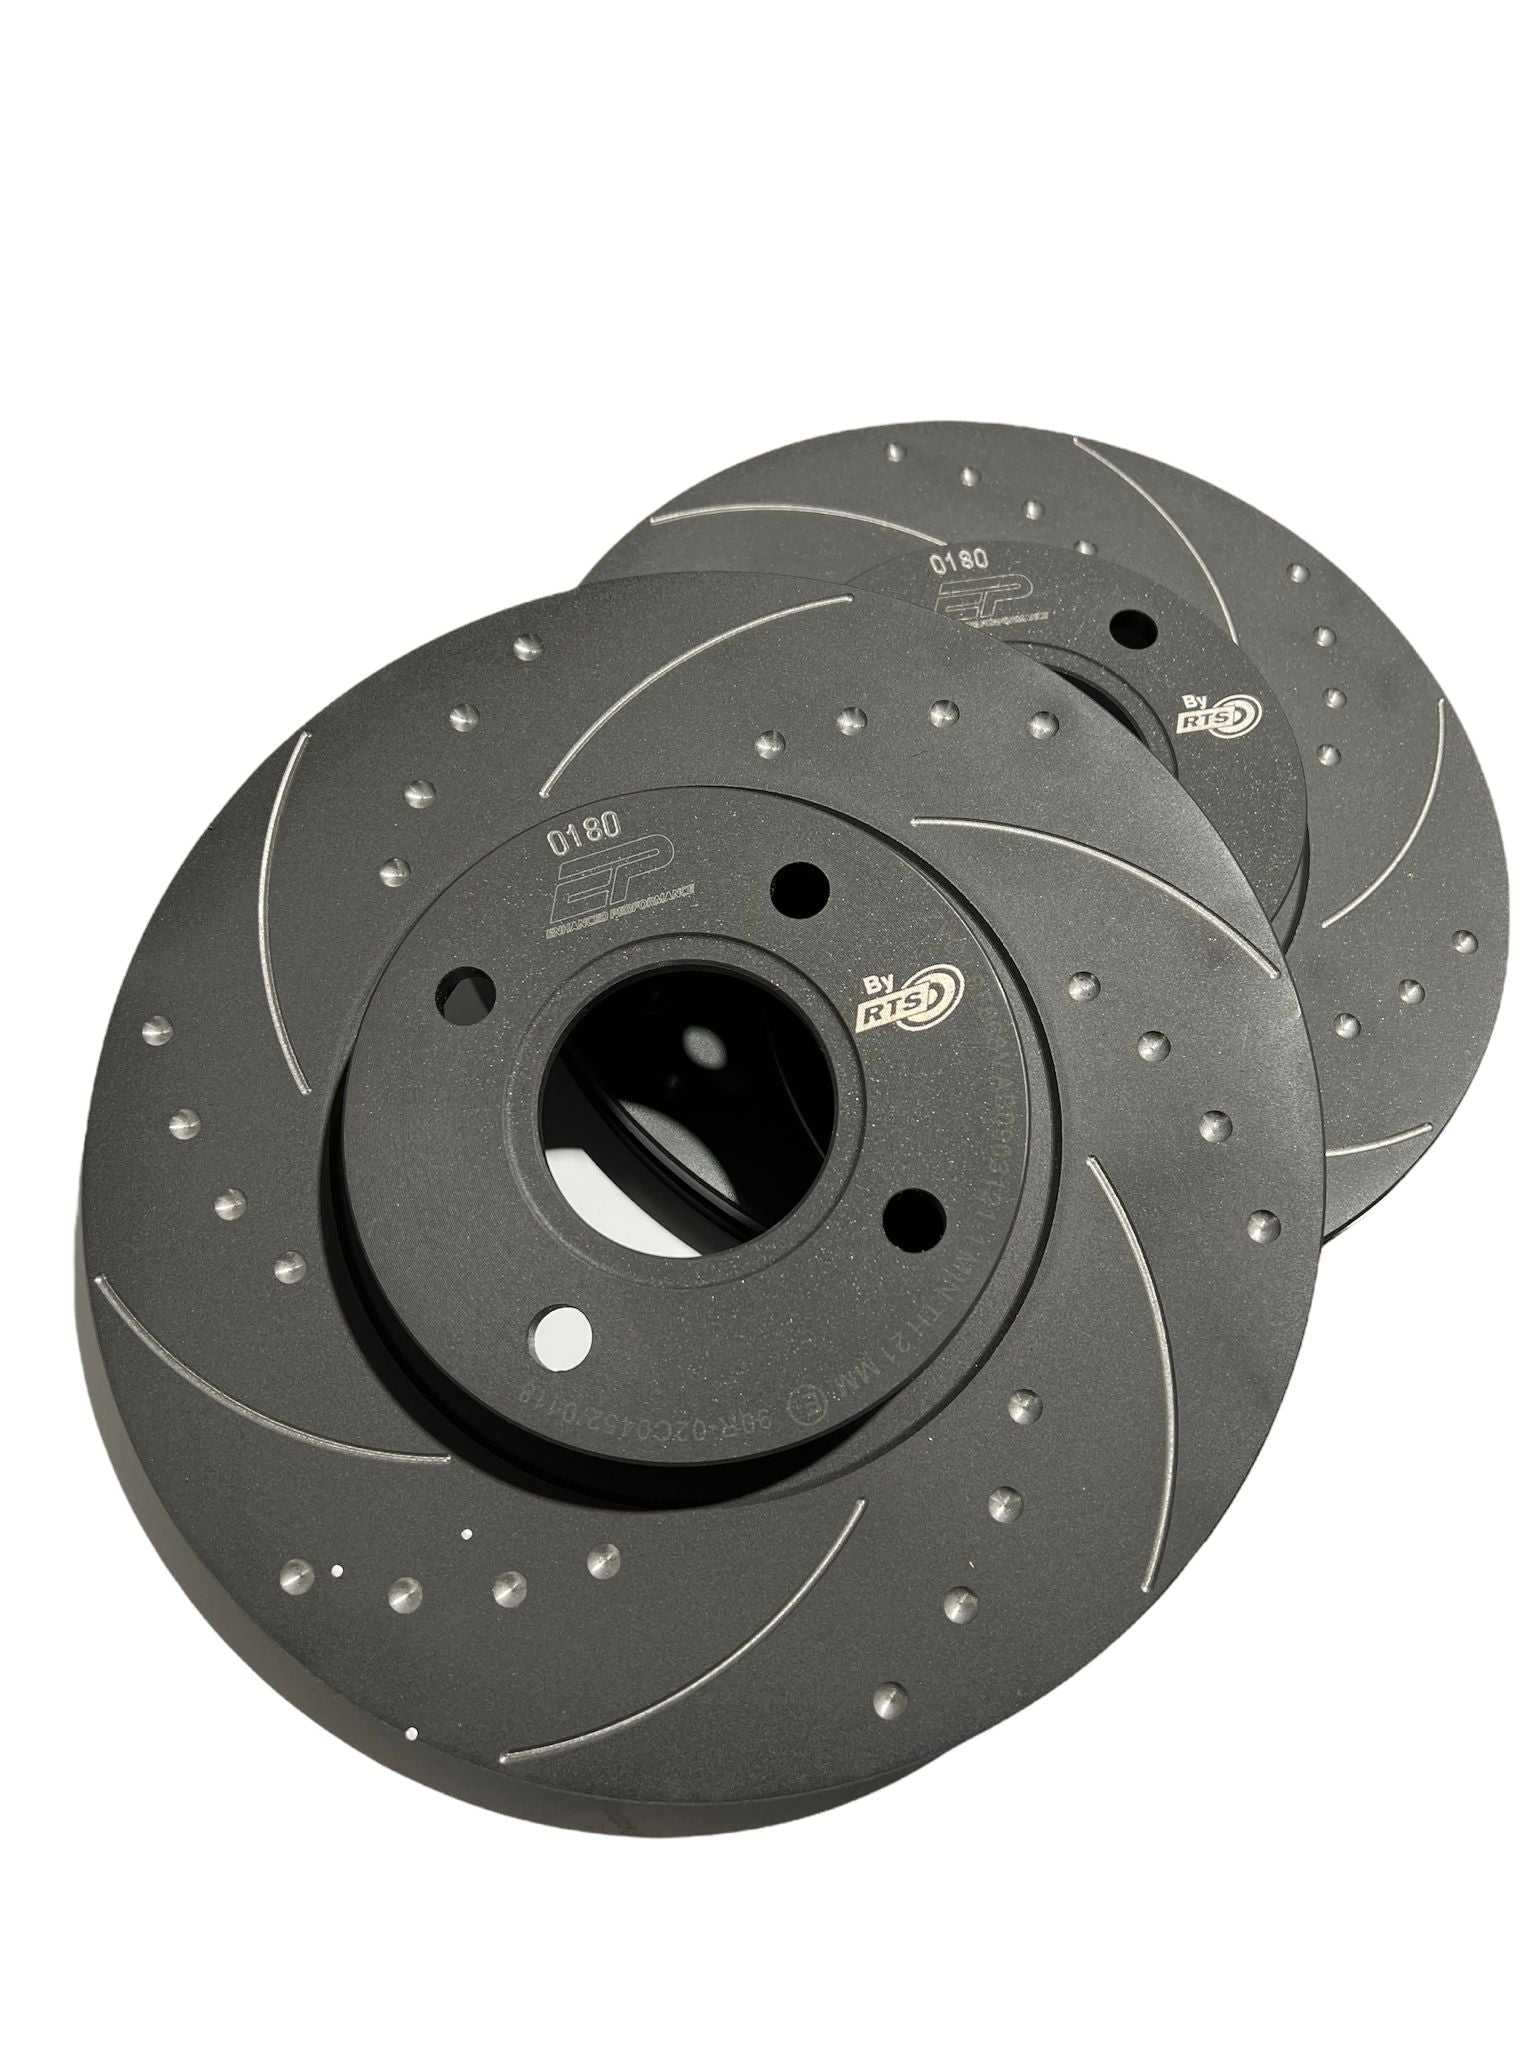 Enhanced Performance, Enhanced Performance (By RTS) Brake Disc Upgrade - Fiesta MK7 1.25 / 1.4 / 1.6 Petrol All Models - Dimpled & Grooved